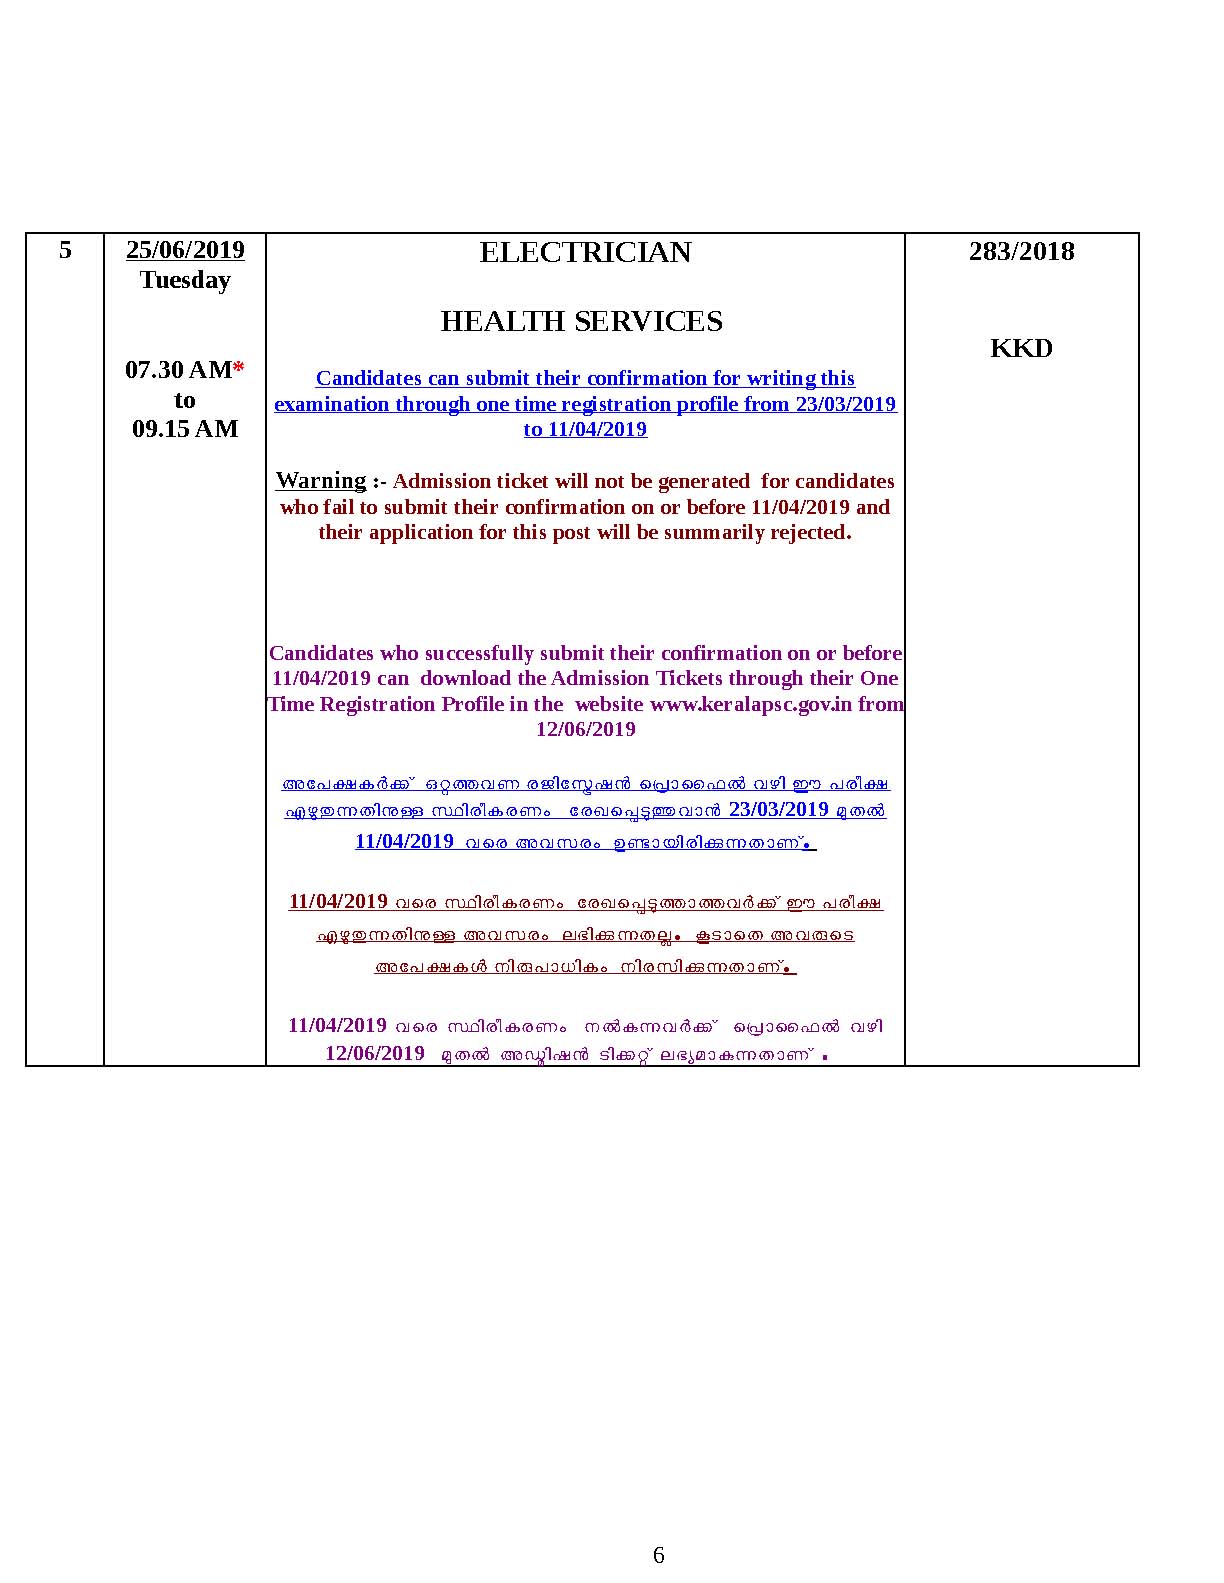 KPSC Examination Programme For The Month Of June 2019 - Notification Image 6